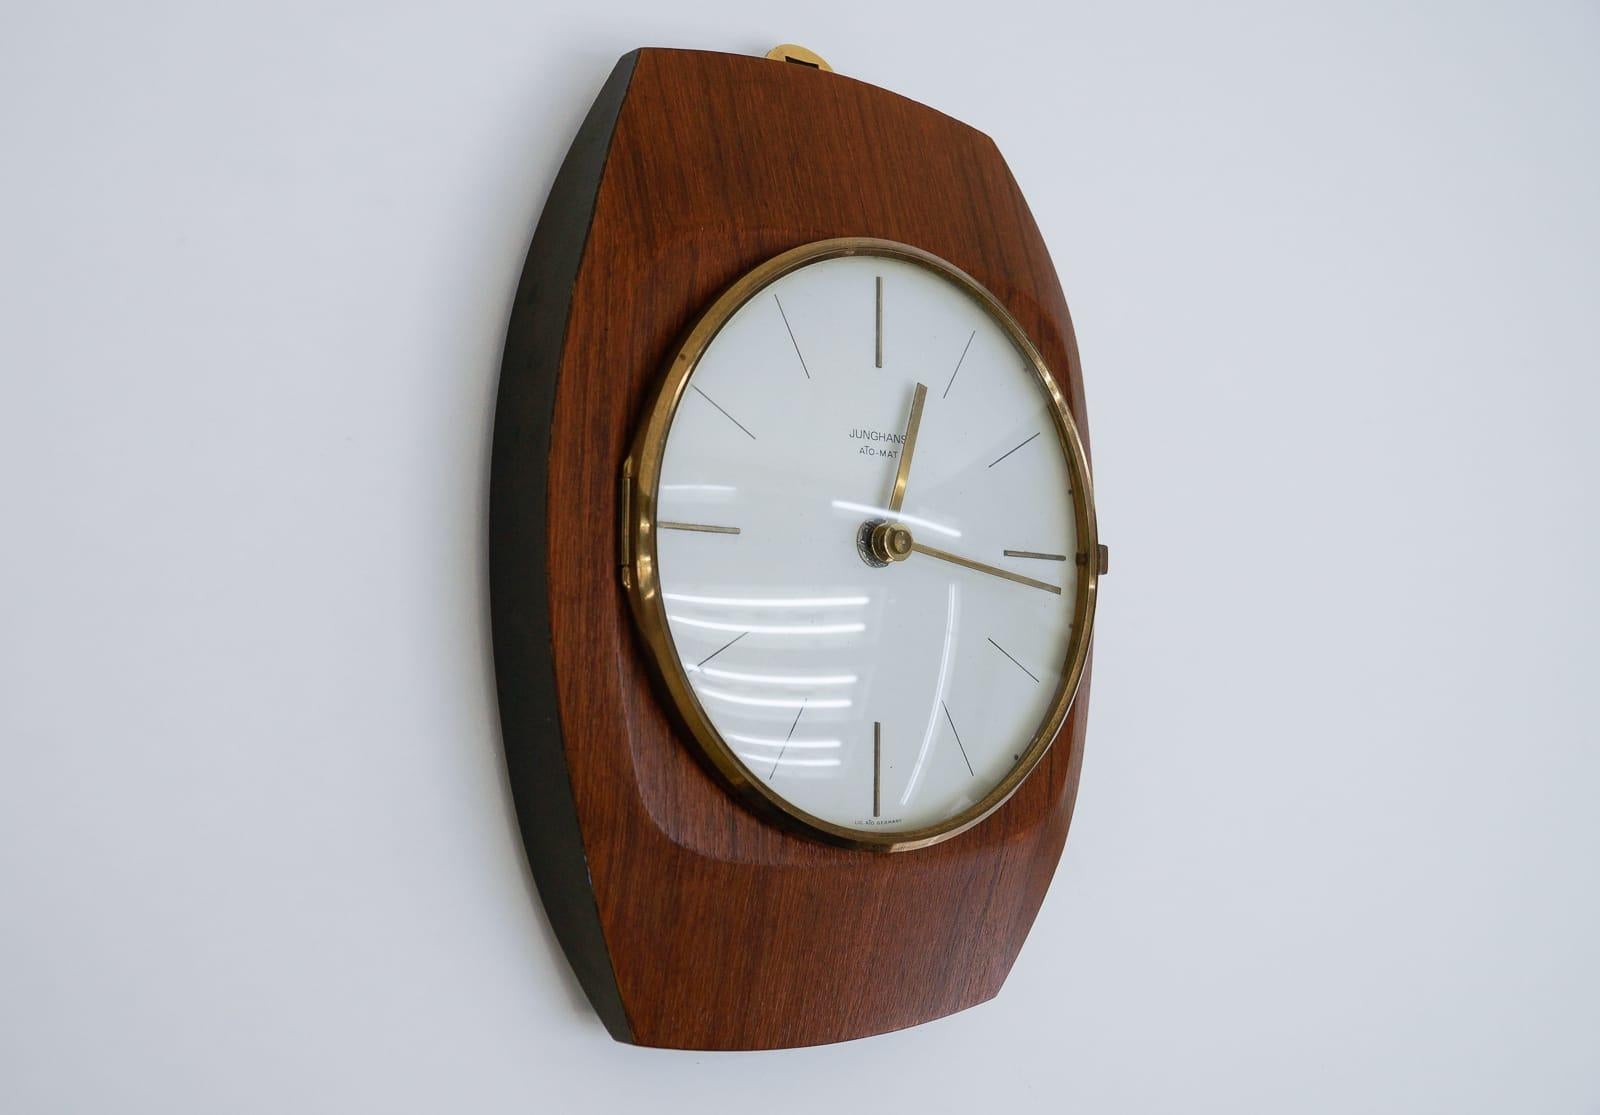 The brass ring allows it to be suspended.

Made in Germany.

Electric, battery operated clock.